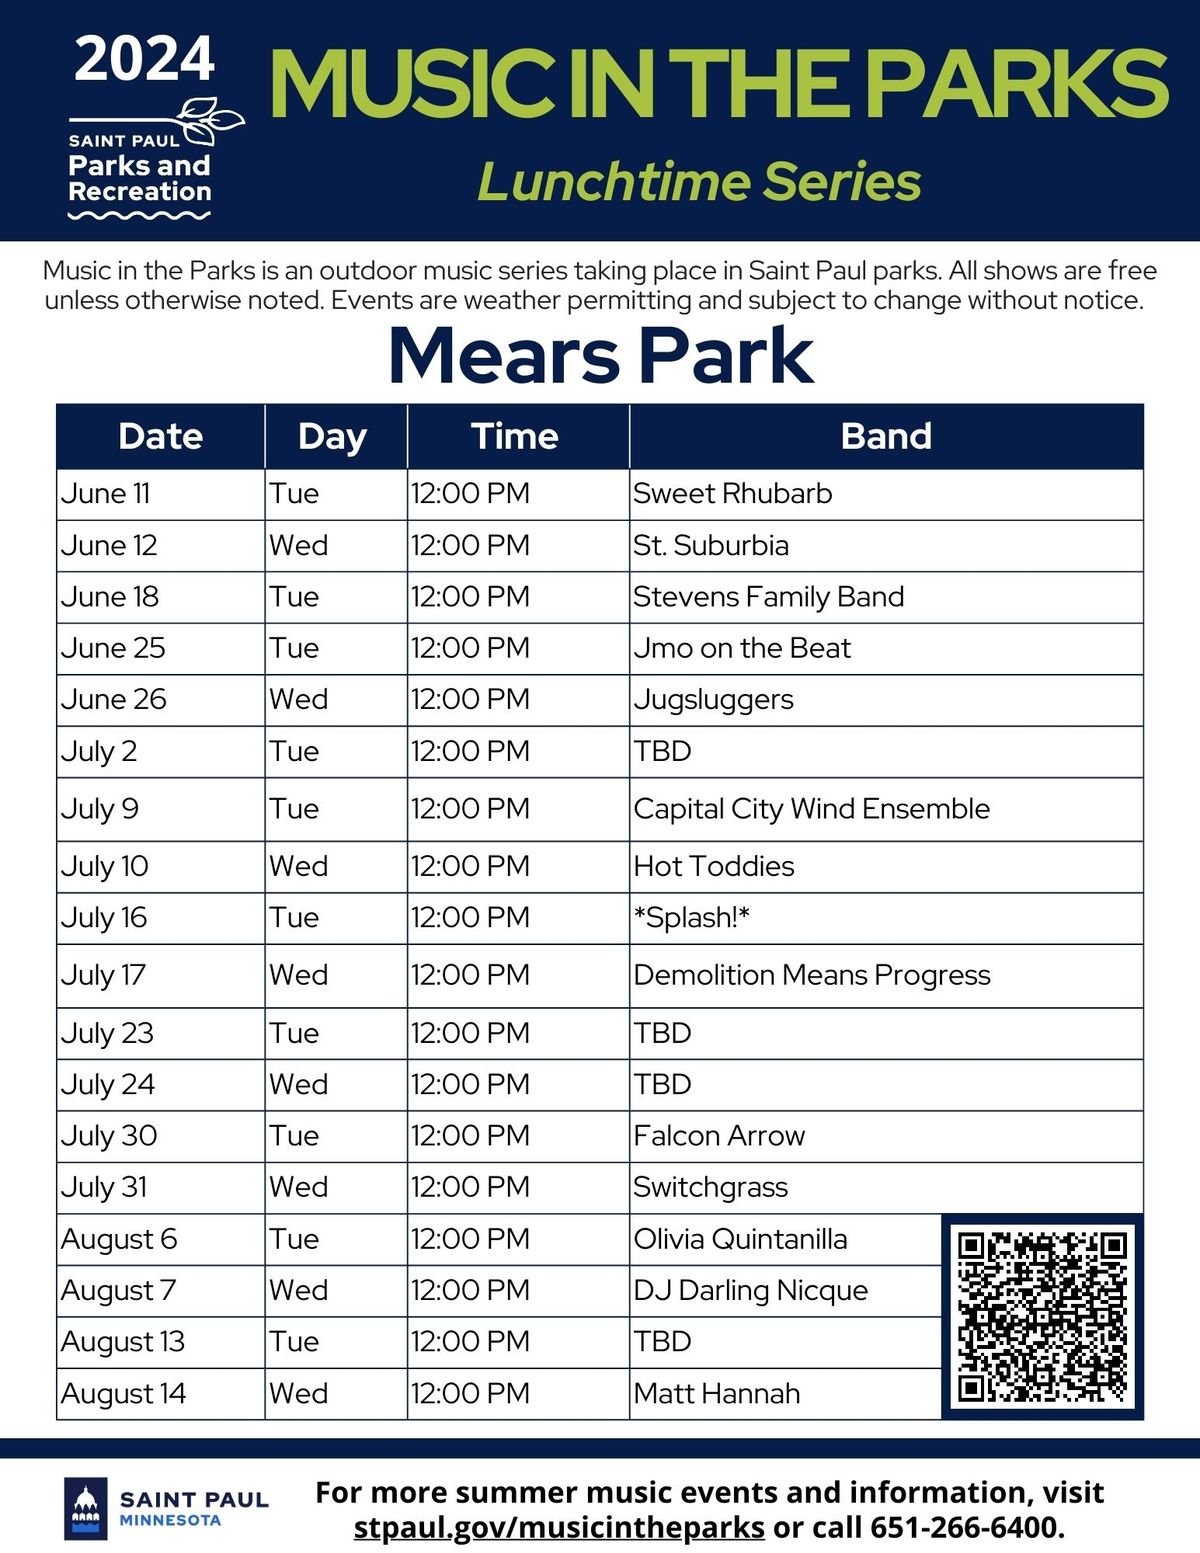 Music in the Park: Mears Park Lunchtime Series